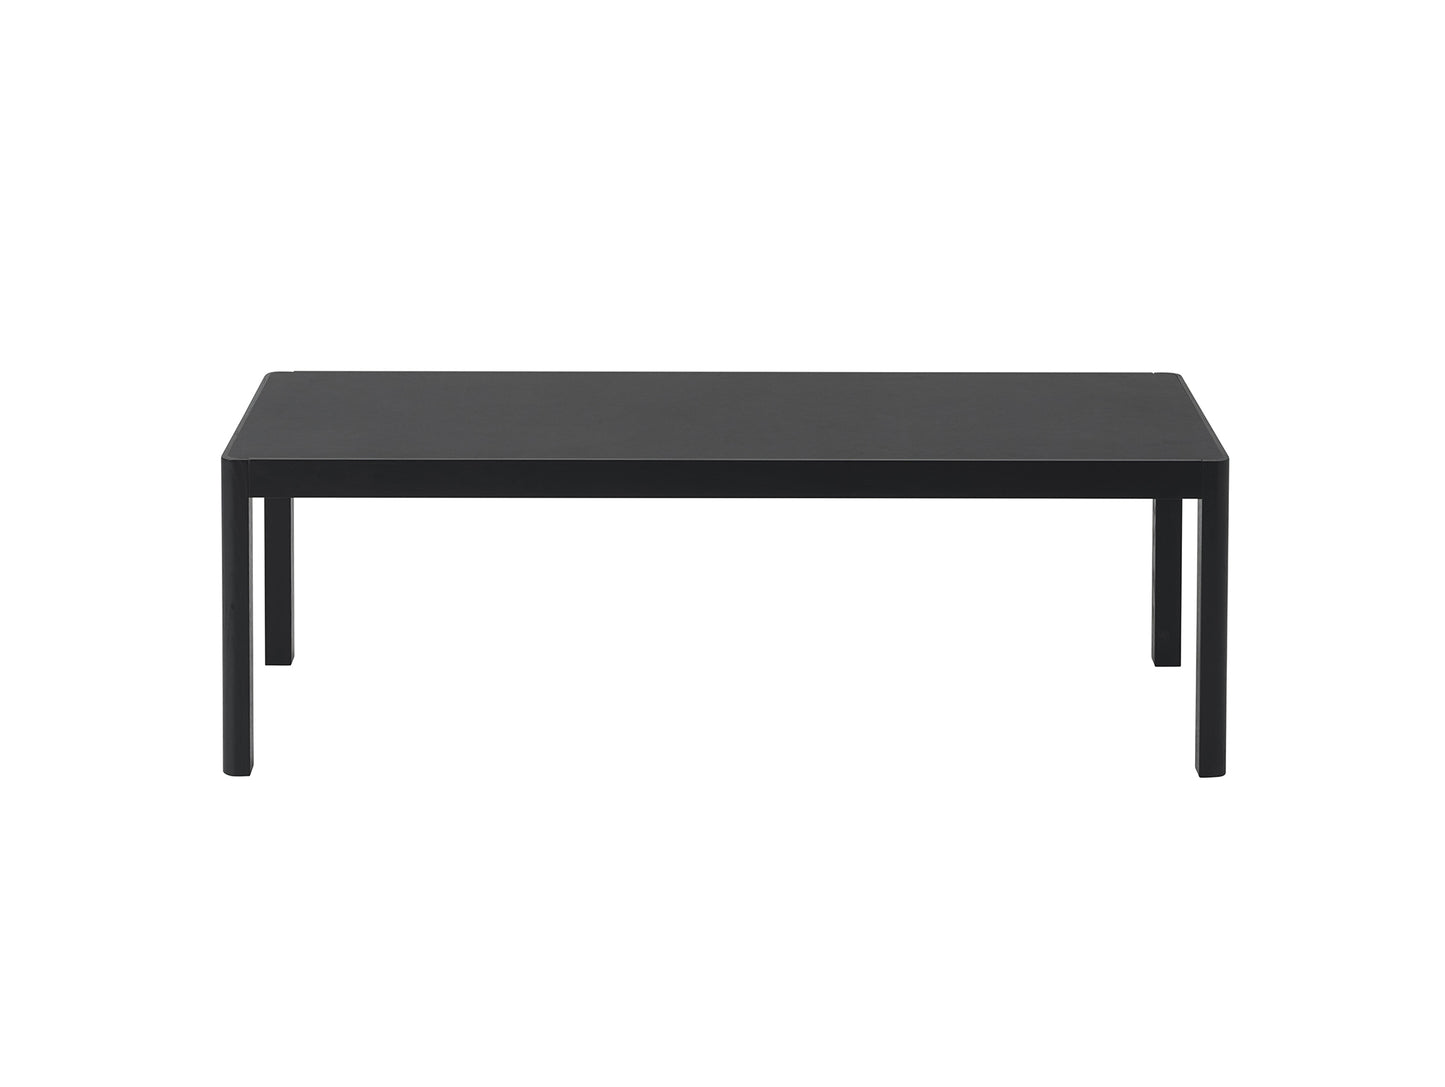 Workshop Coffee Table by Muuto - 120 x 43 cm / Black Linoleum Top with Black Lacquered Oak Base